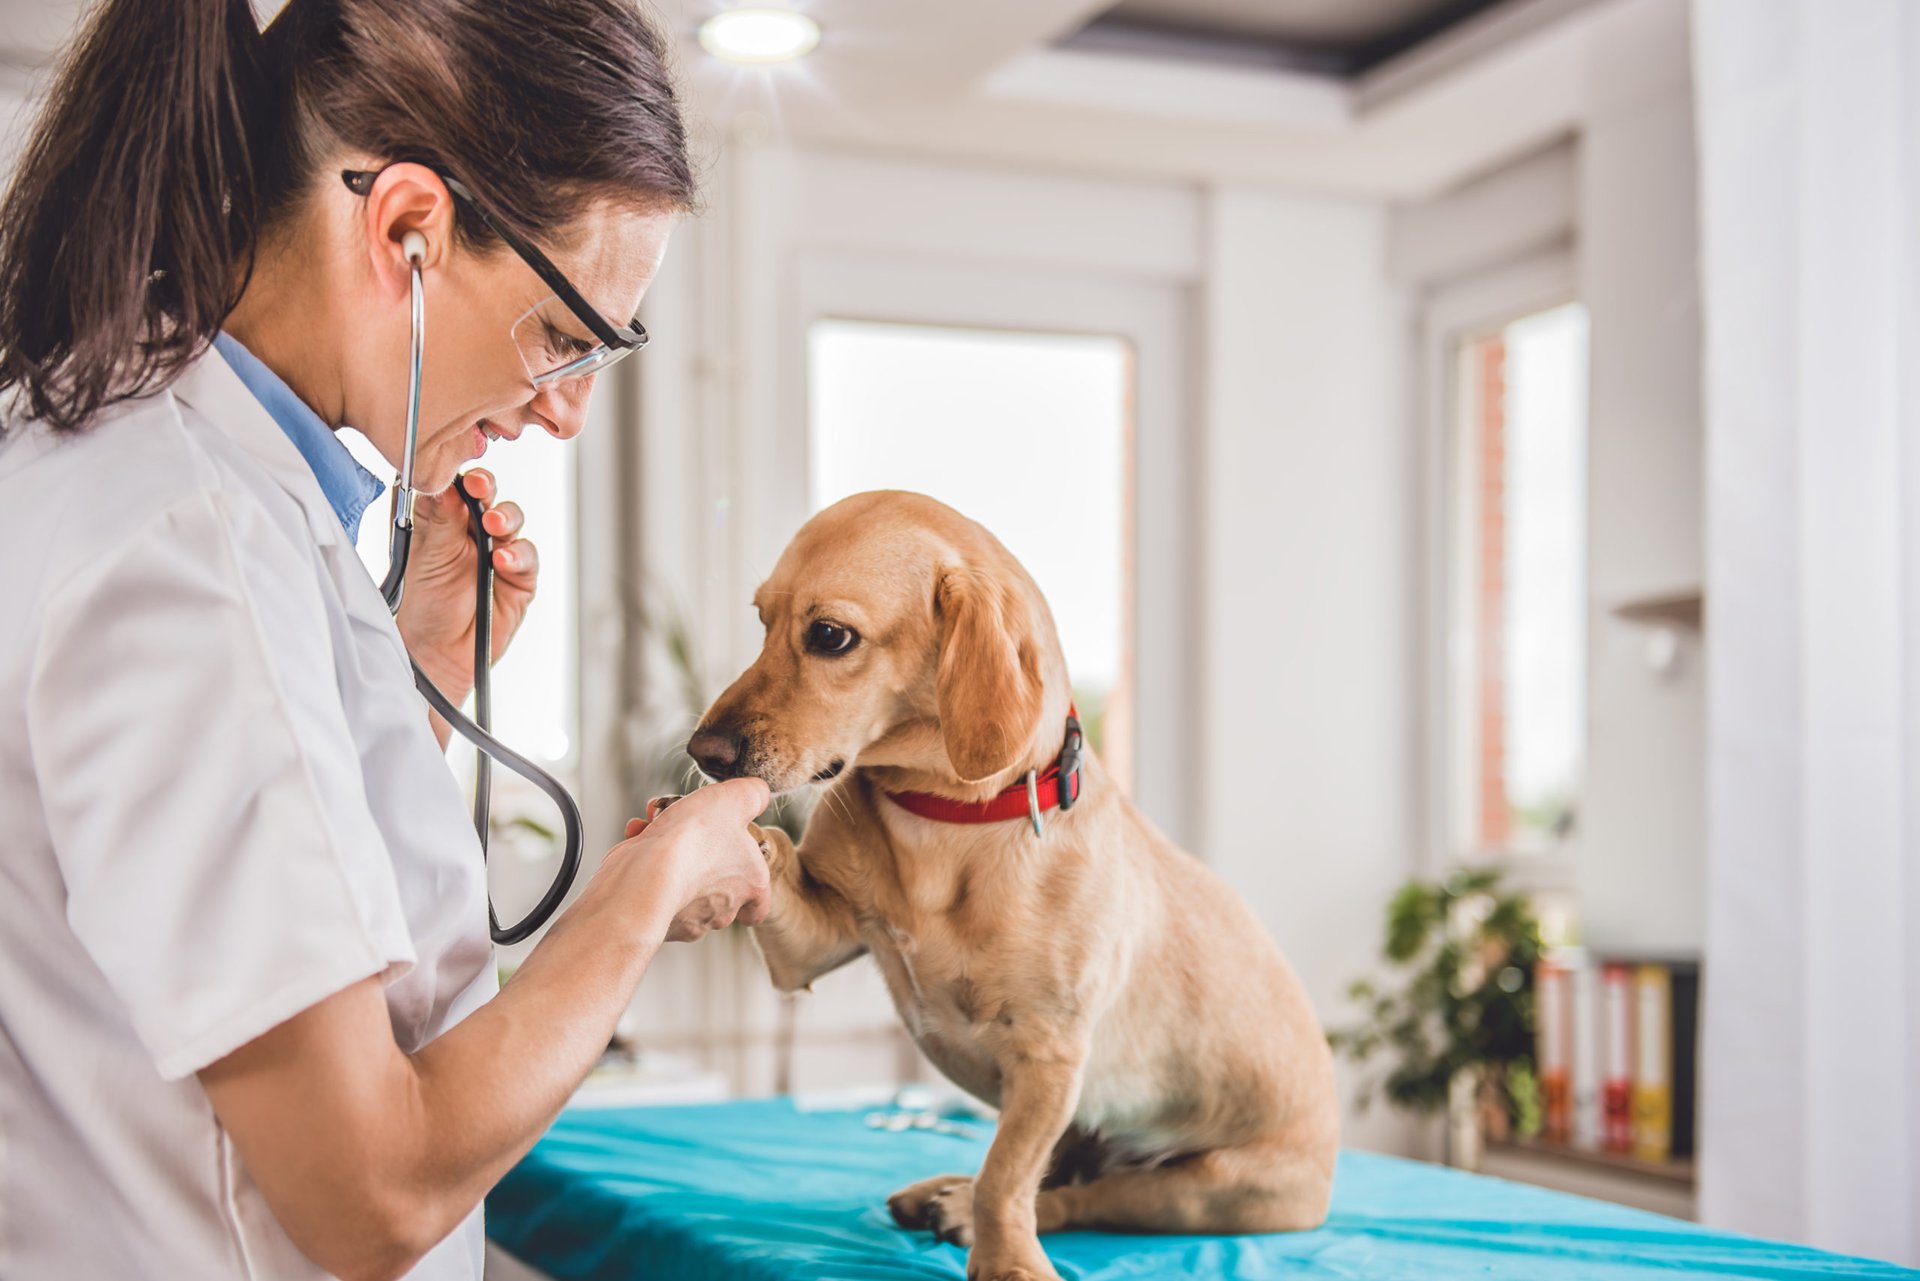 9 Ways to Get Affordable Vet Care - Vet Clinics Near You